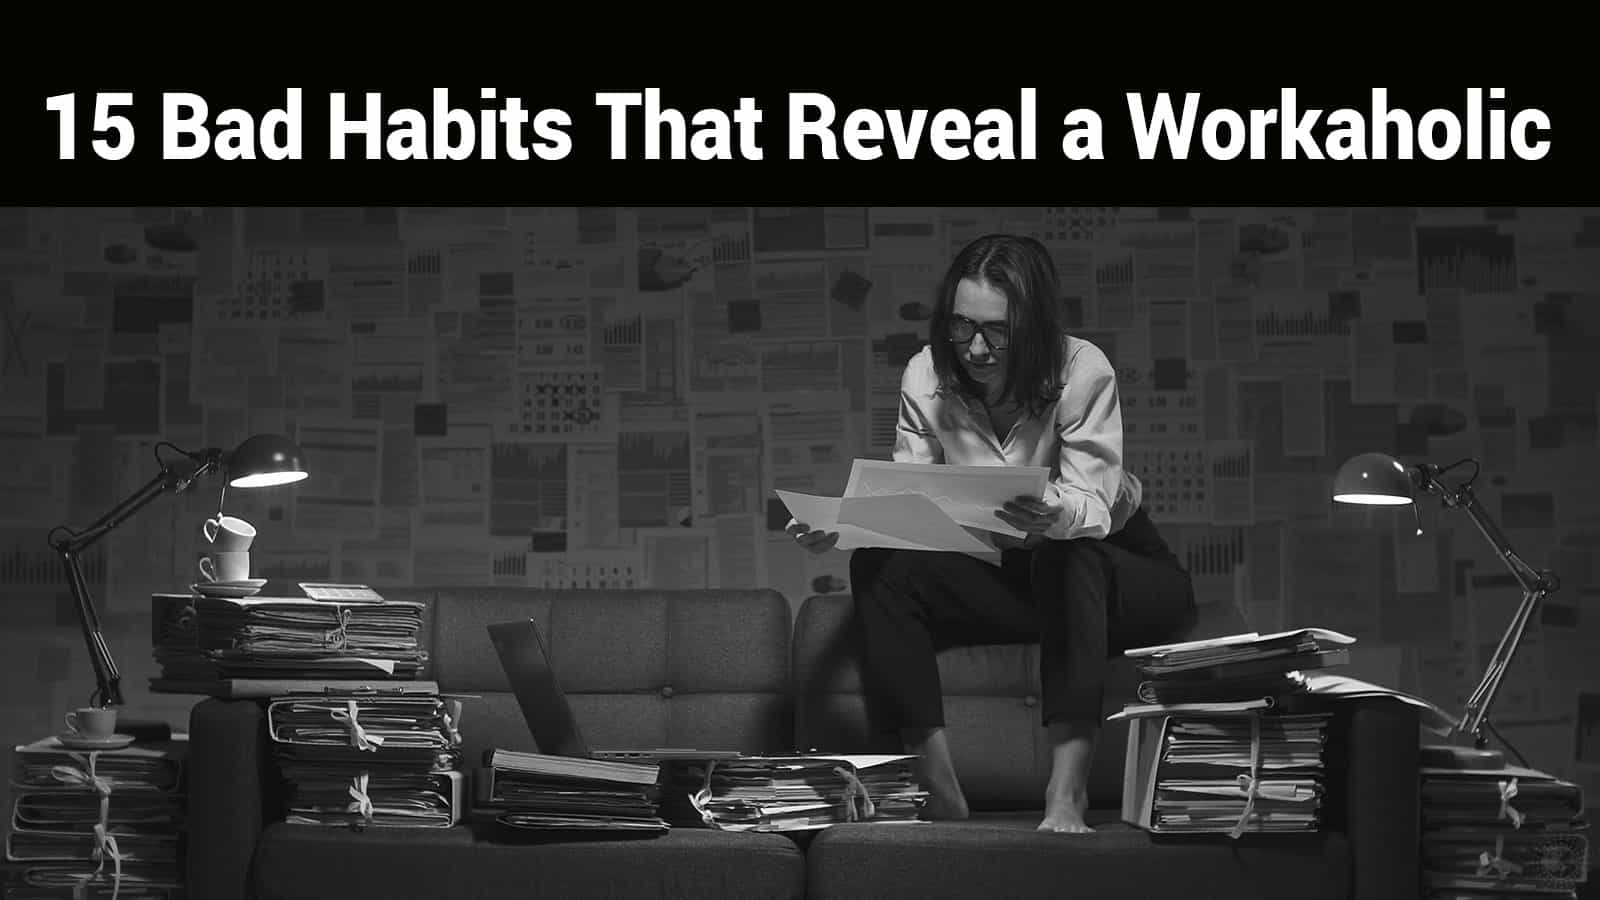 15 Bad Habits That Reveal a Workaholic